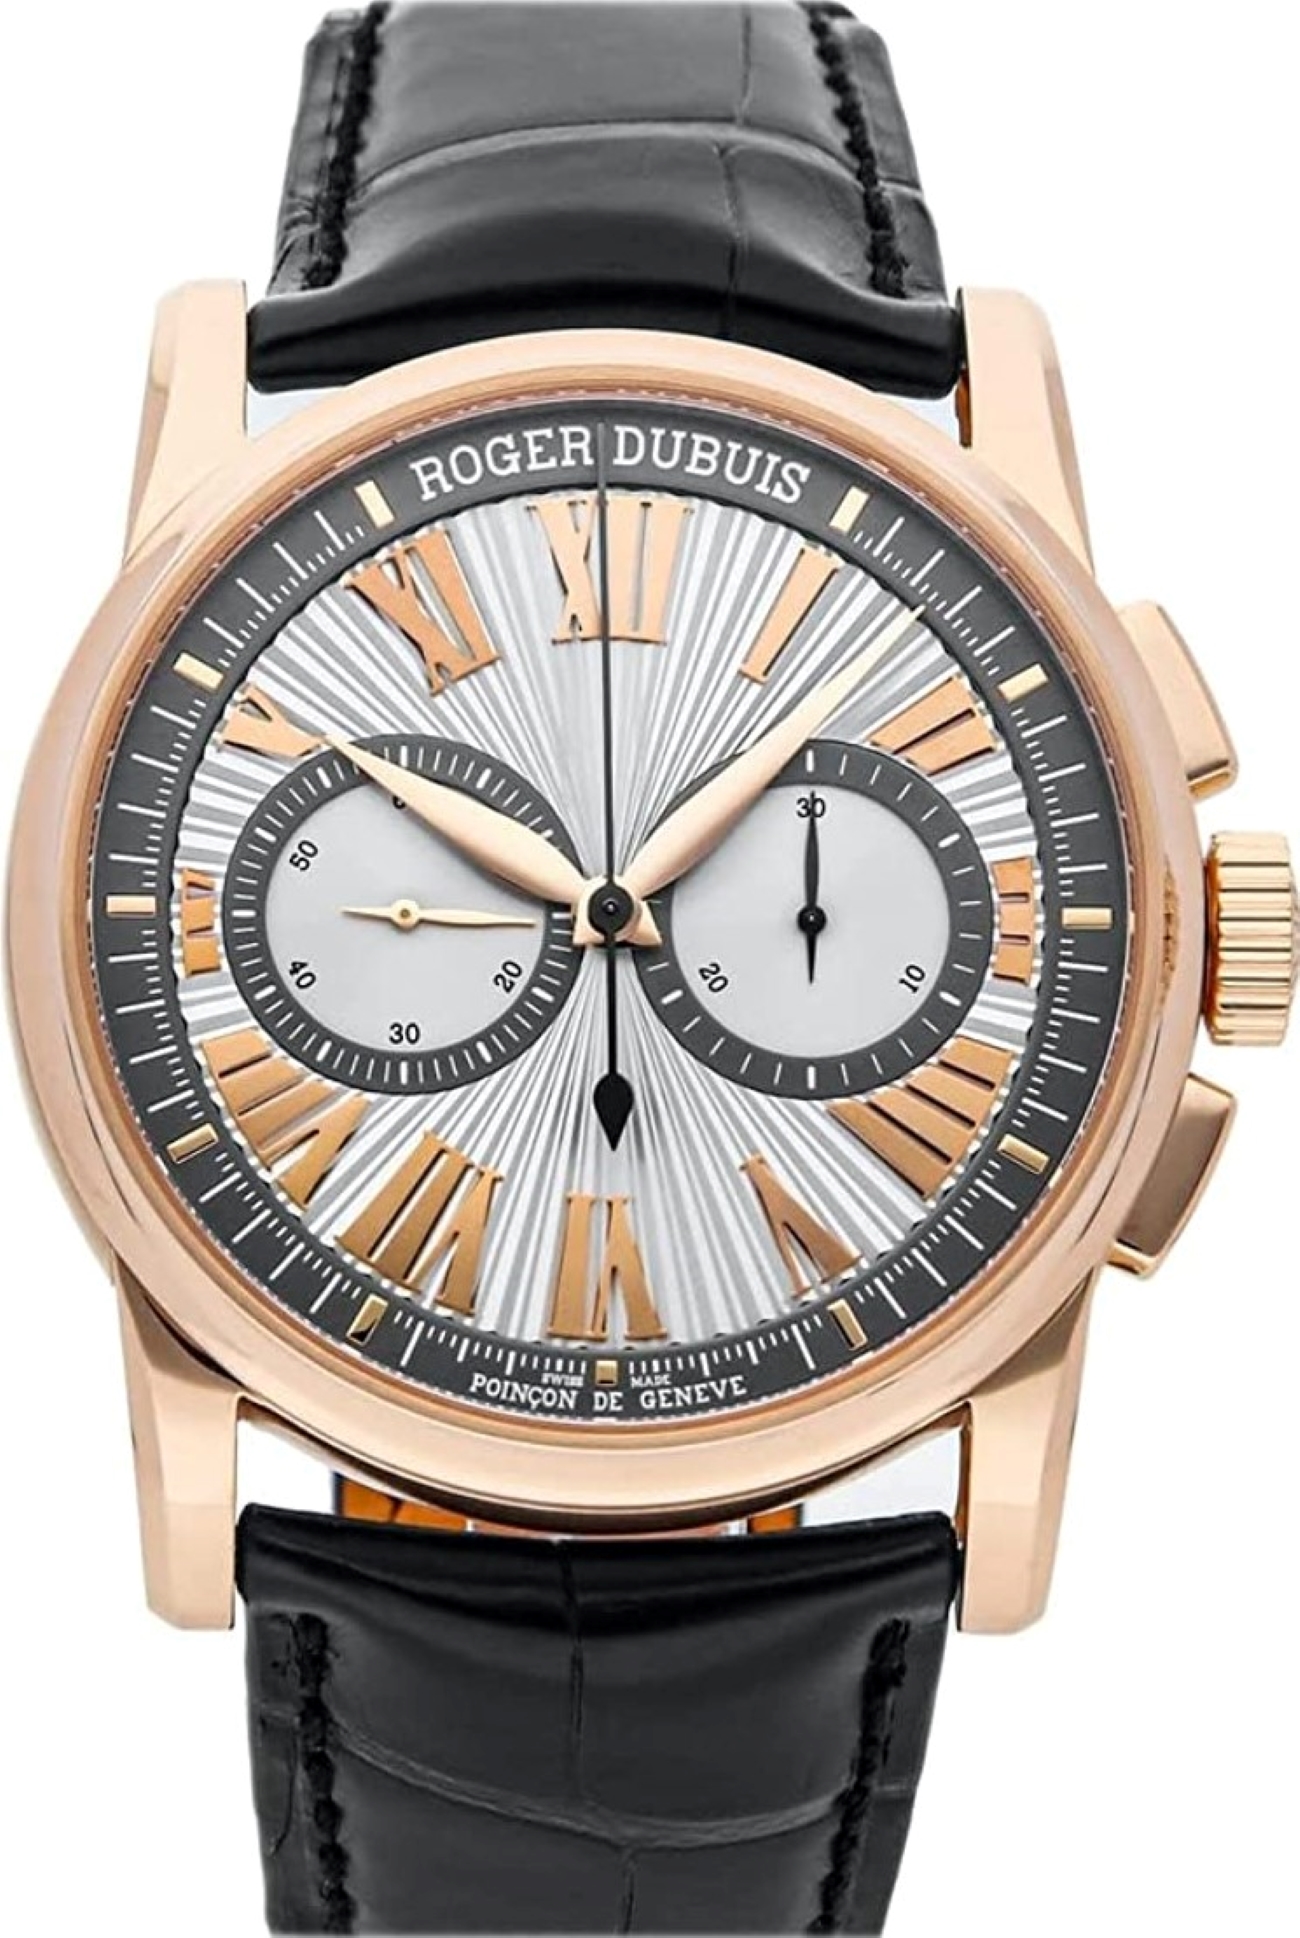 ROGER DUBUIS HOMMAGE CHRONOGRAPH  42MM ROSE GOLD REF: DBOH0569